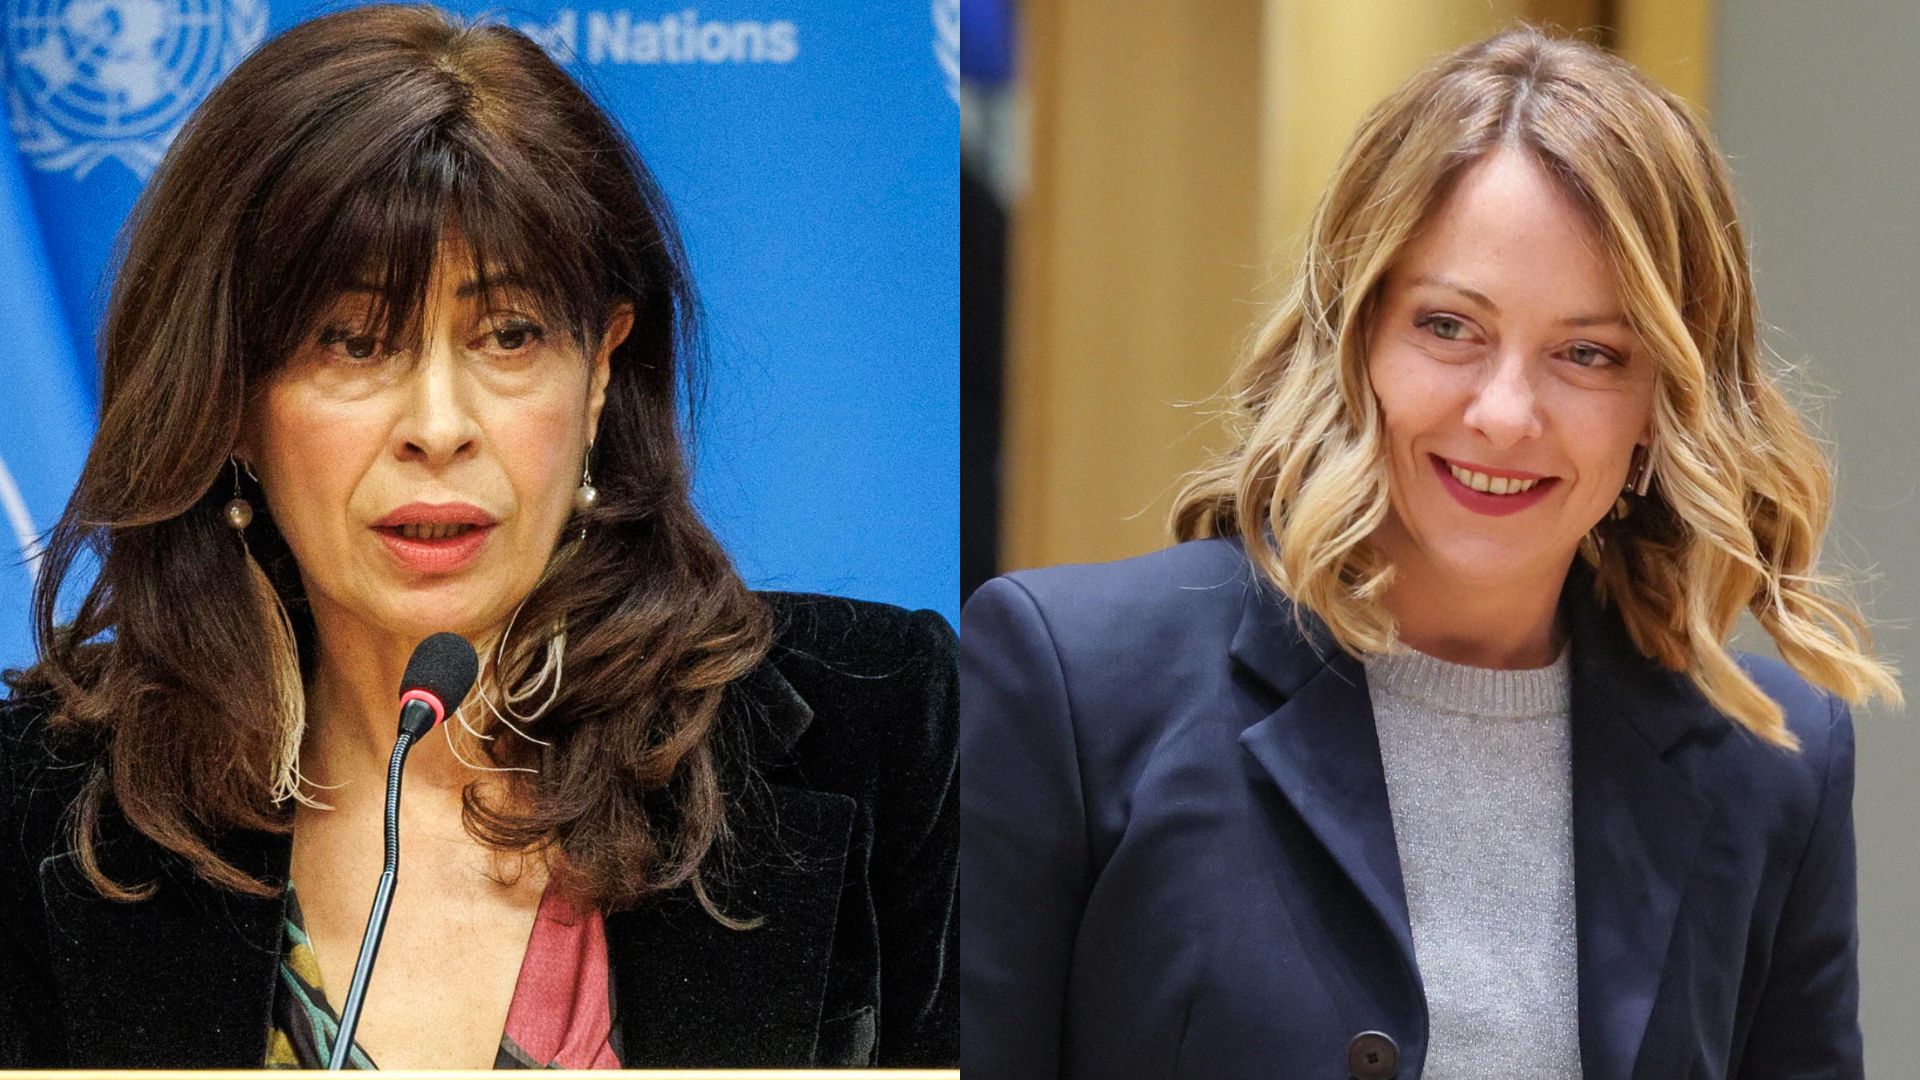 Italy-Spain conflict on abortion, Meloni strongly nosed against the minister of Sánchez: “He does not know what he is talking about, avoids lessons”